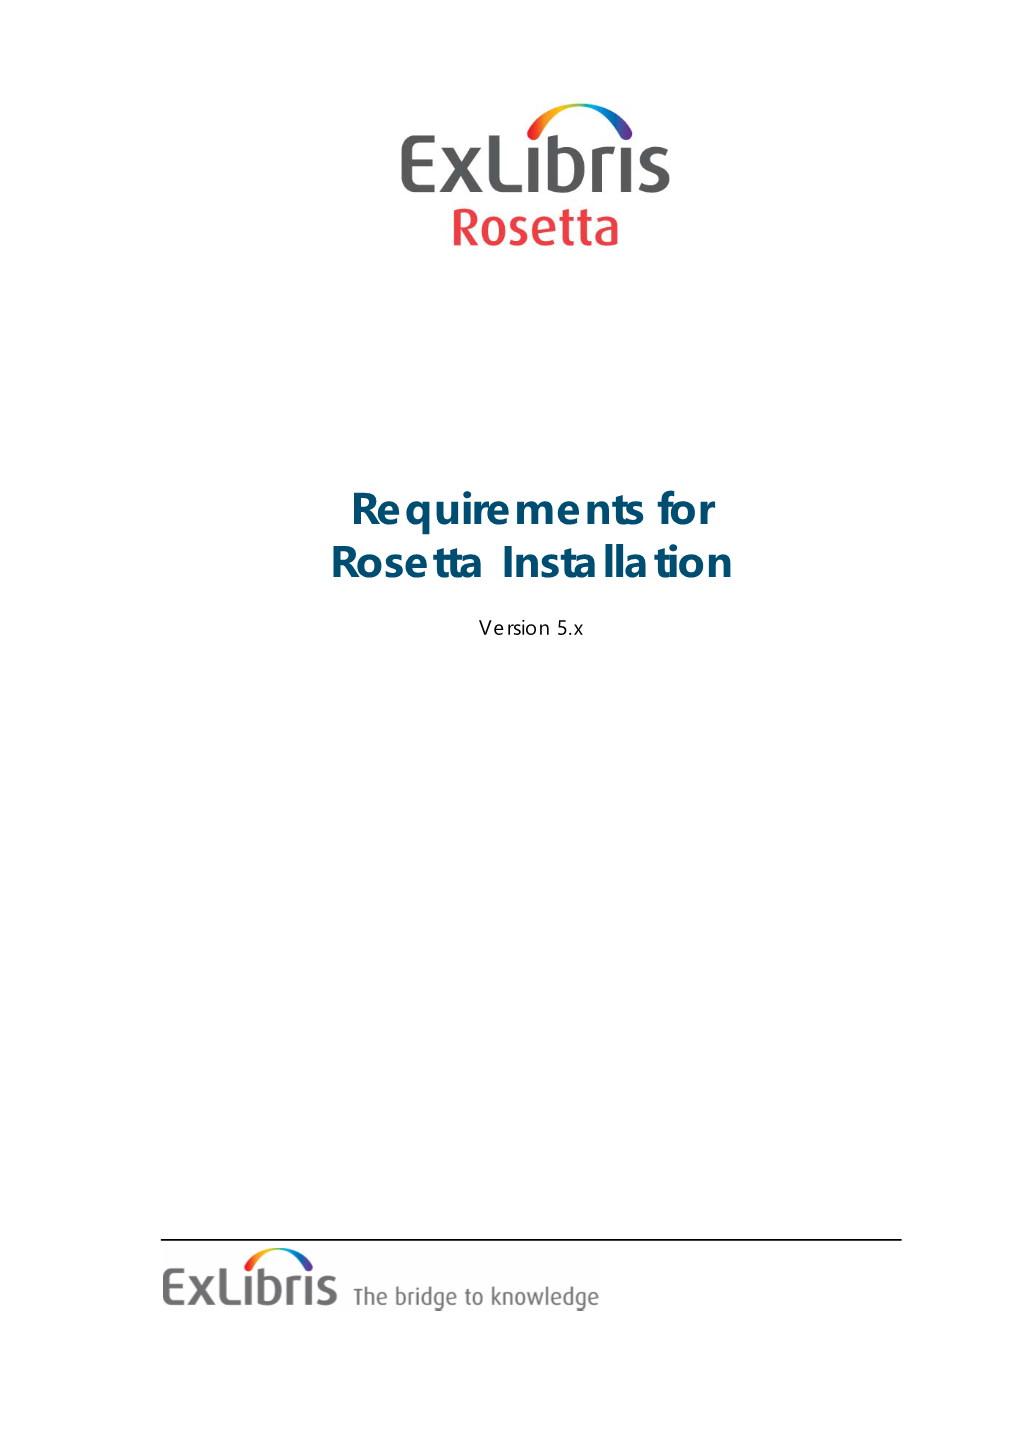 Requirements for Rosetta Installation